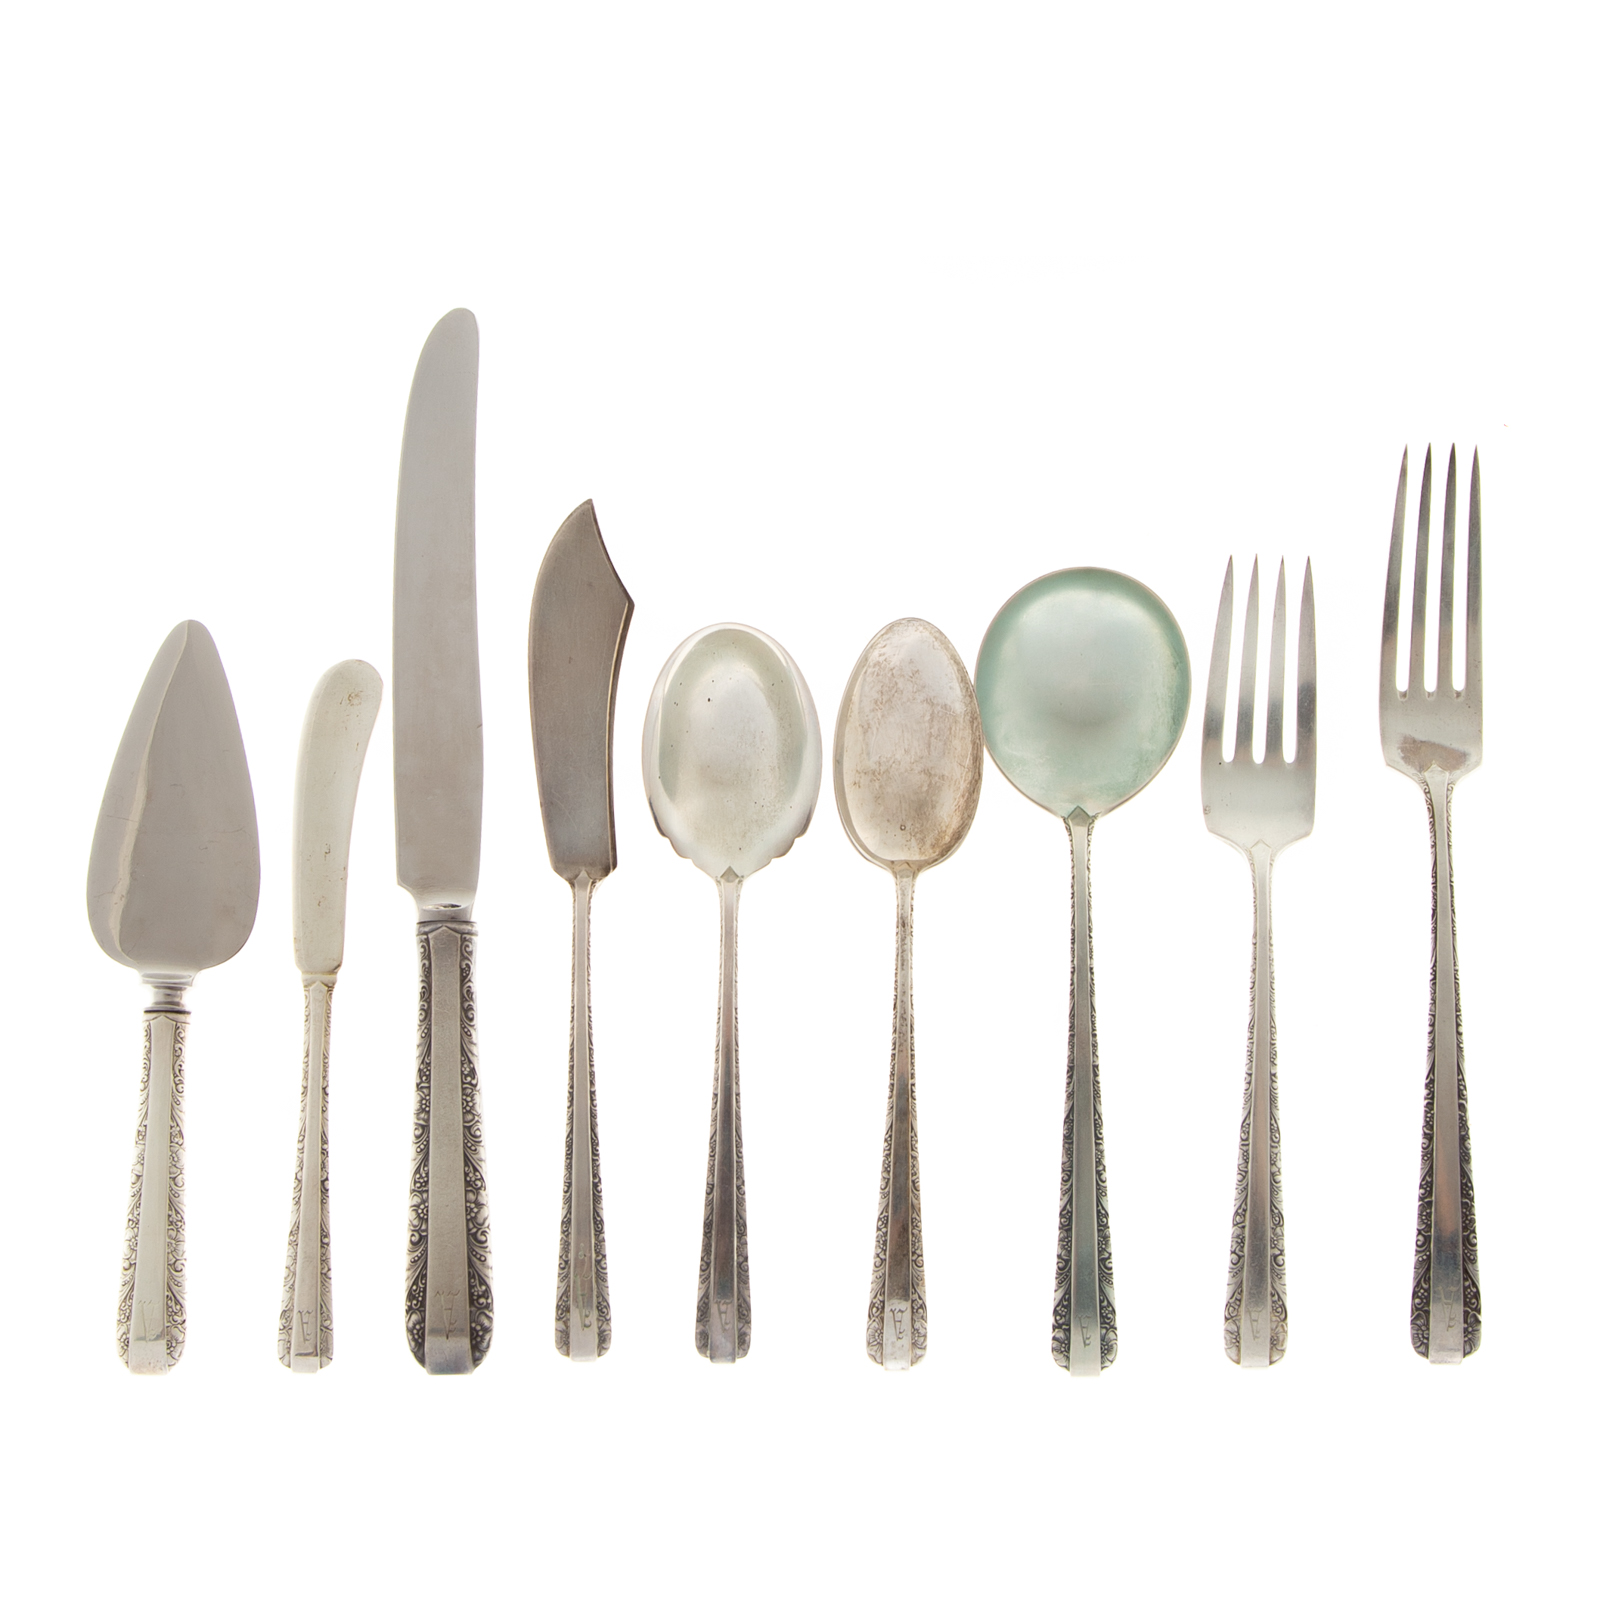 TOWLE STERLING "CANDLELIGHT" FLATWARE